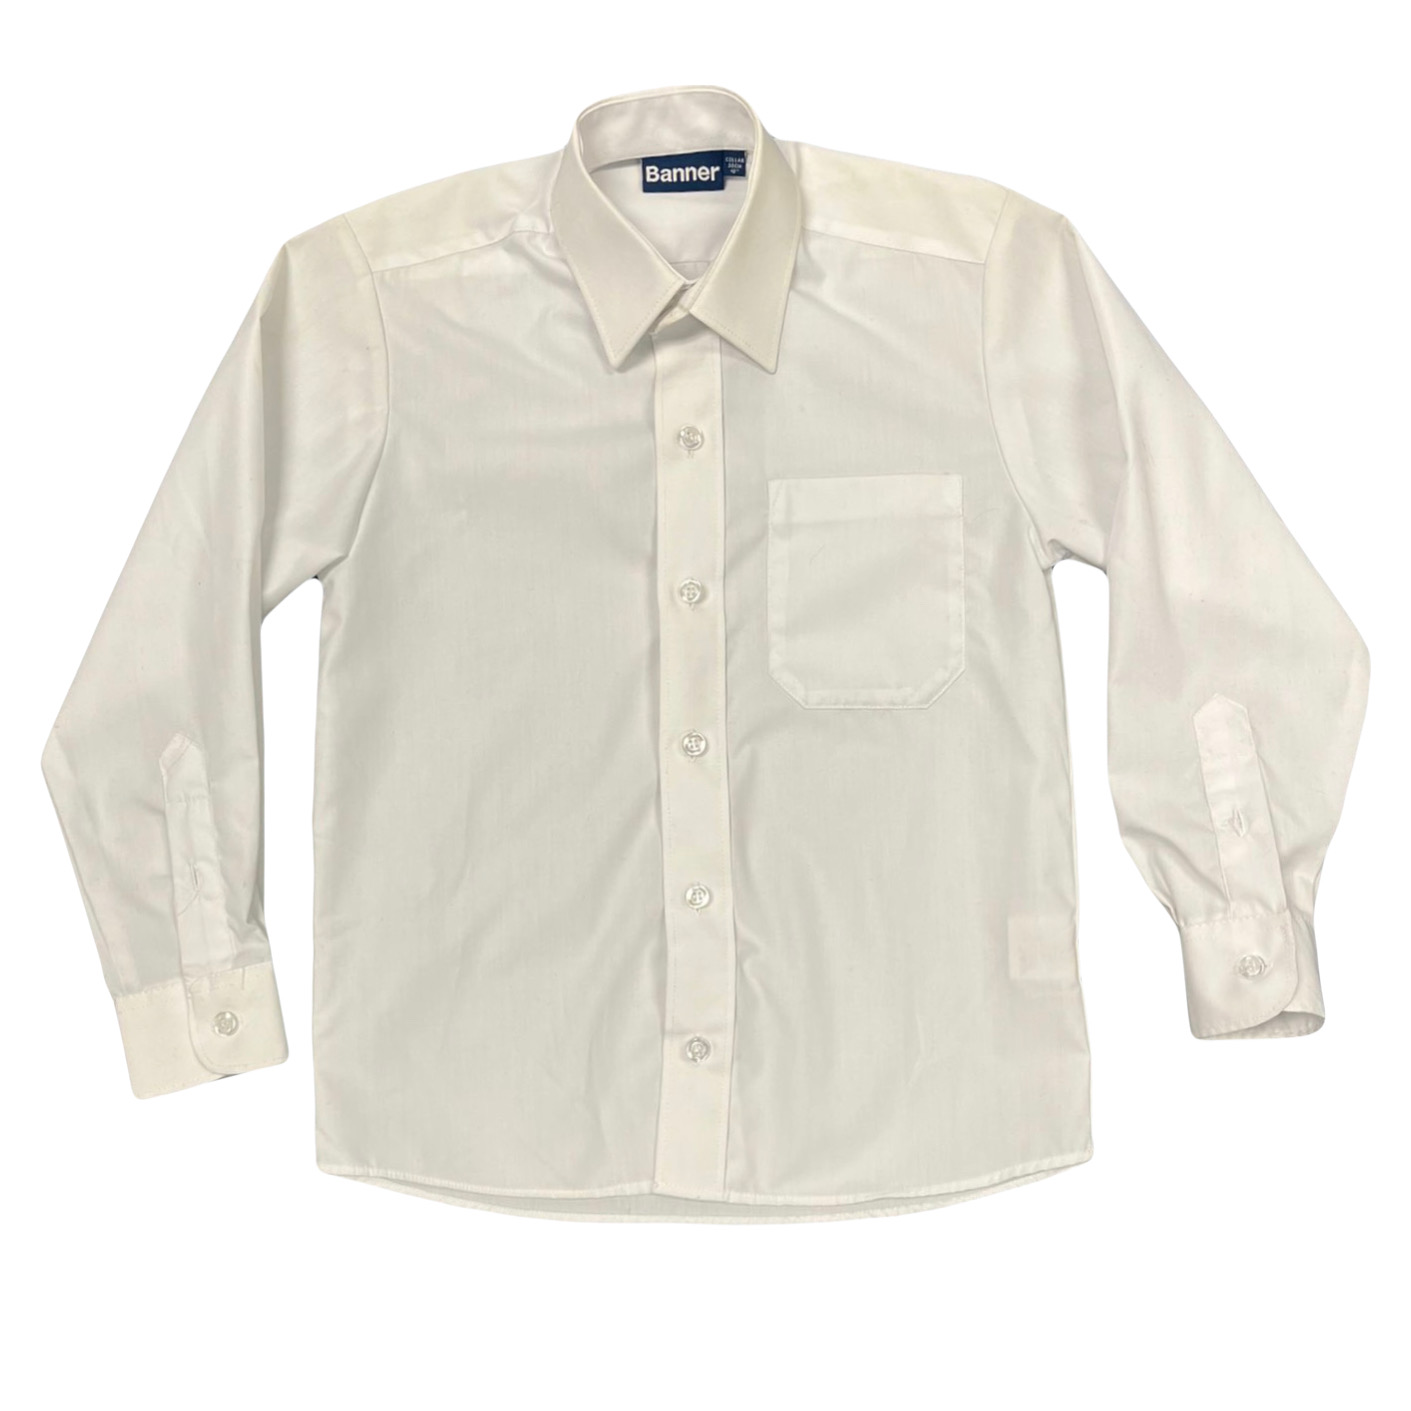 Chatham and Clarendon Long Sleeve Shirt – 2 pack